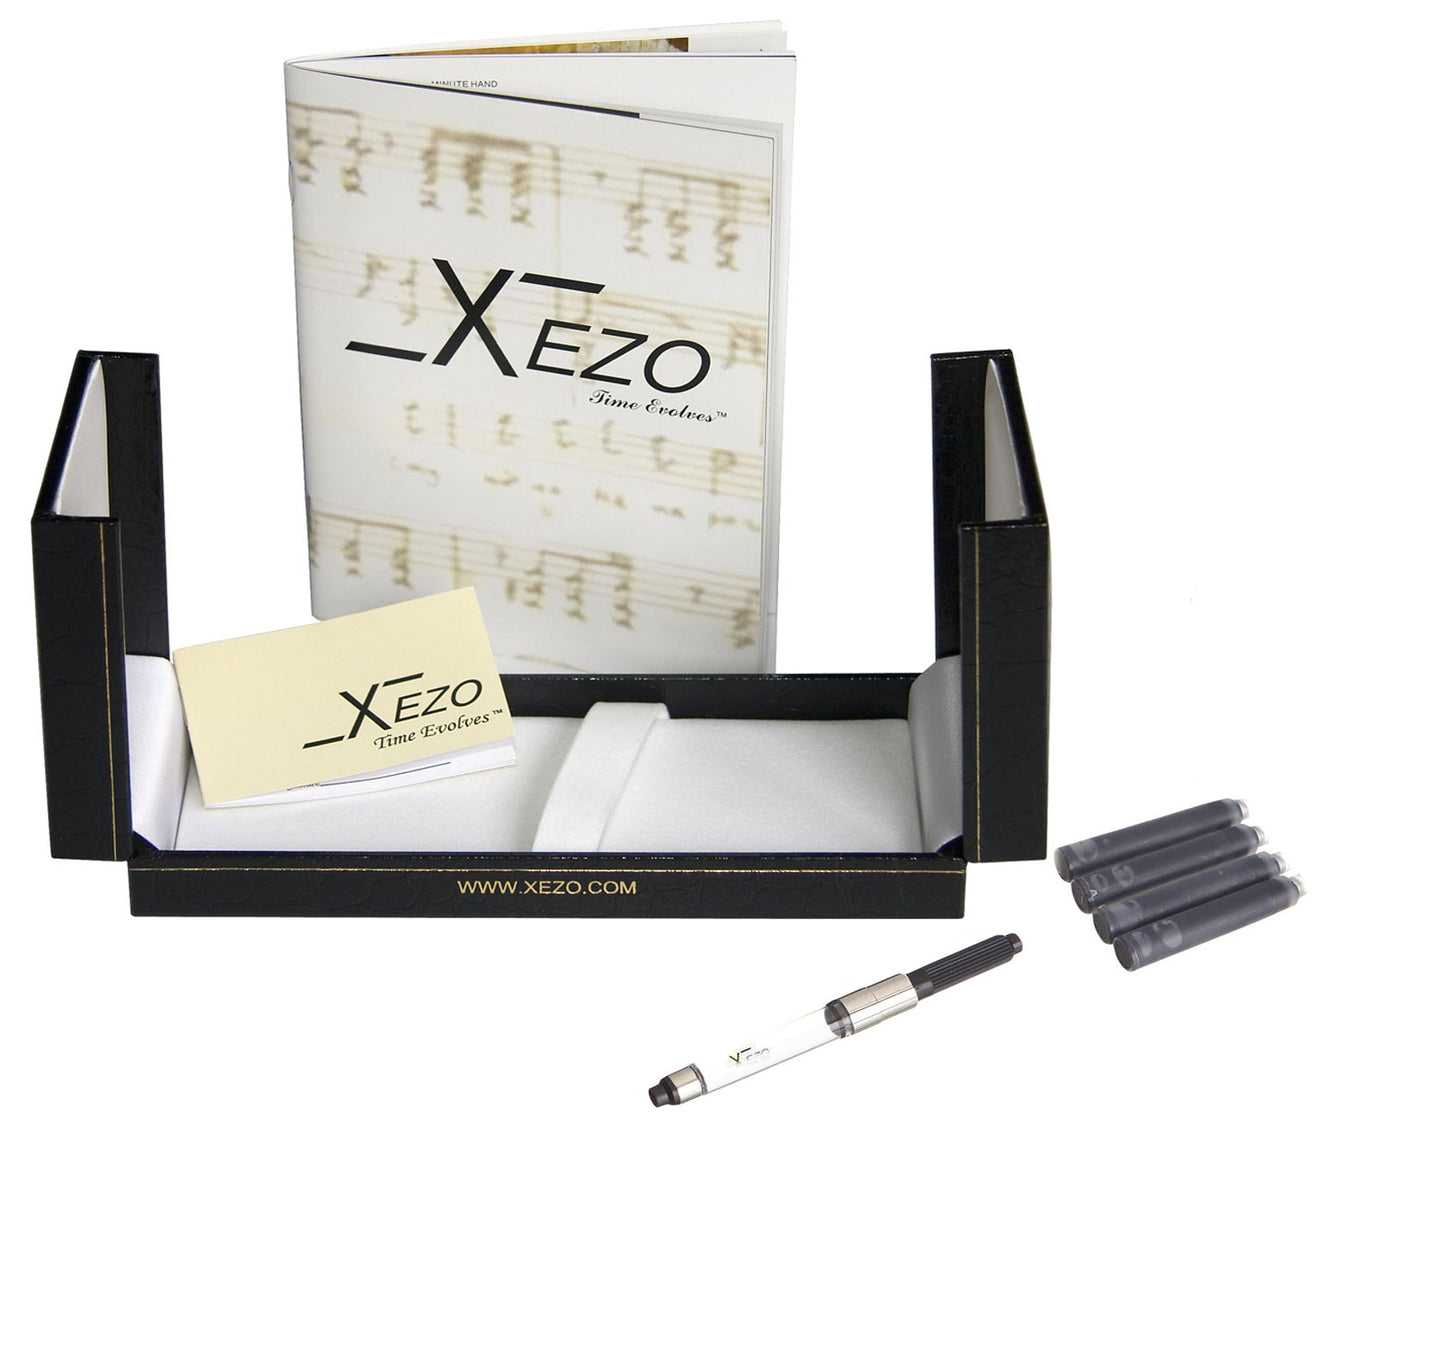 Xezo - Black gift box, certificate, manual, chrome-plated ink converter, and four ink cartridges of the Maestro MOP Sea Shell FM fountain pen